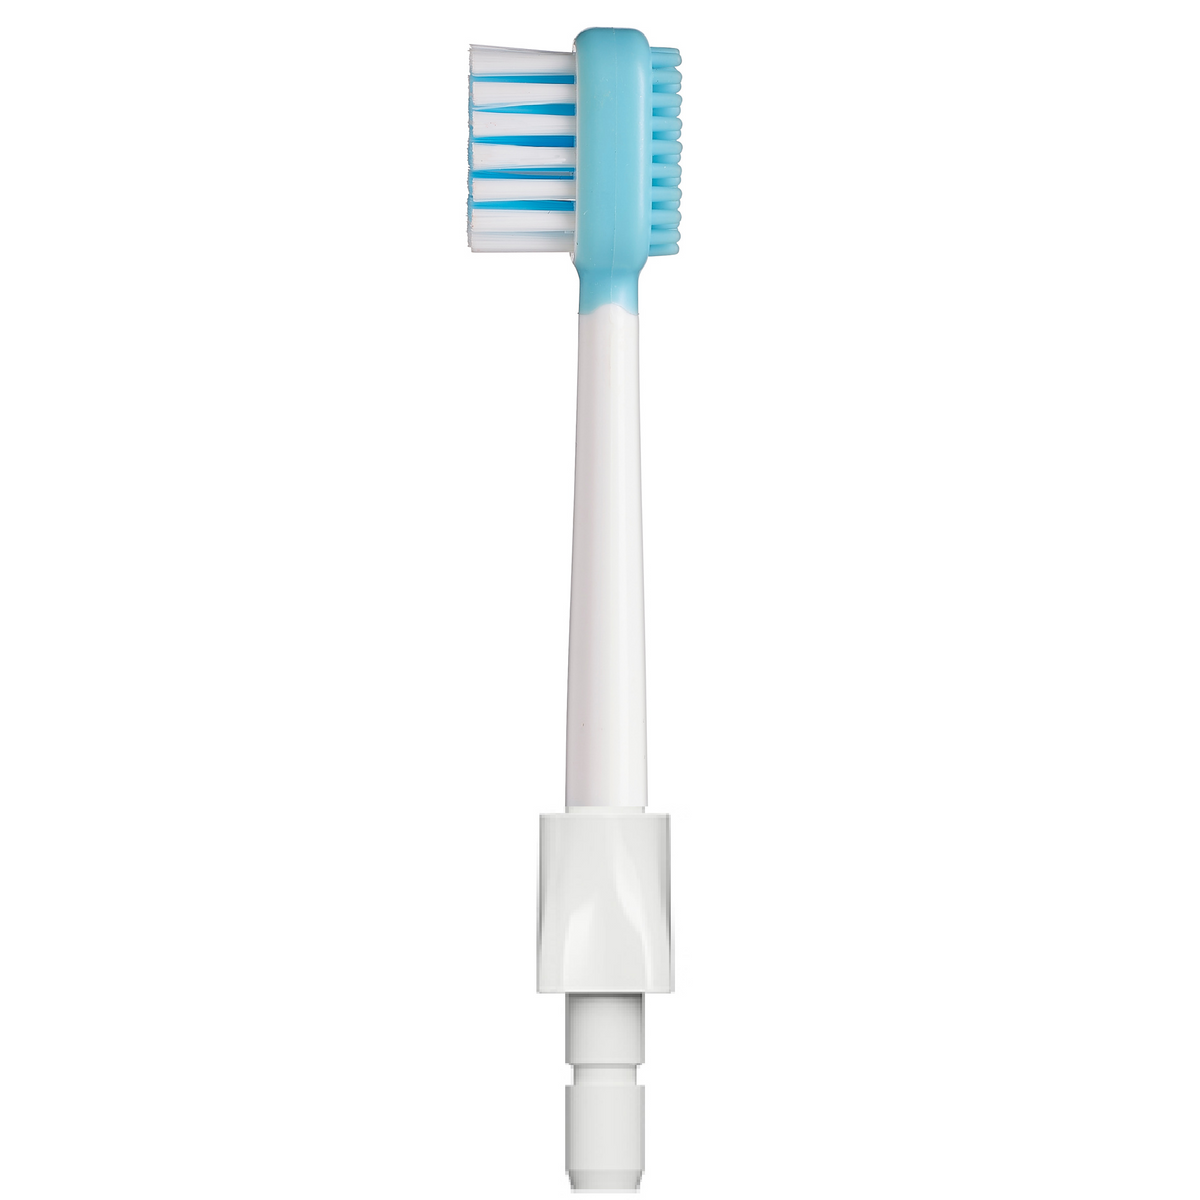 clean your tongue and your teeth with the same toothbrush that water flosses